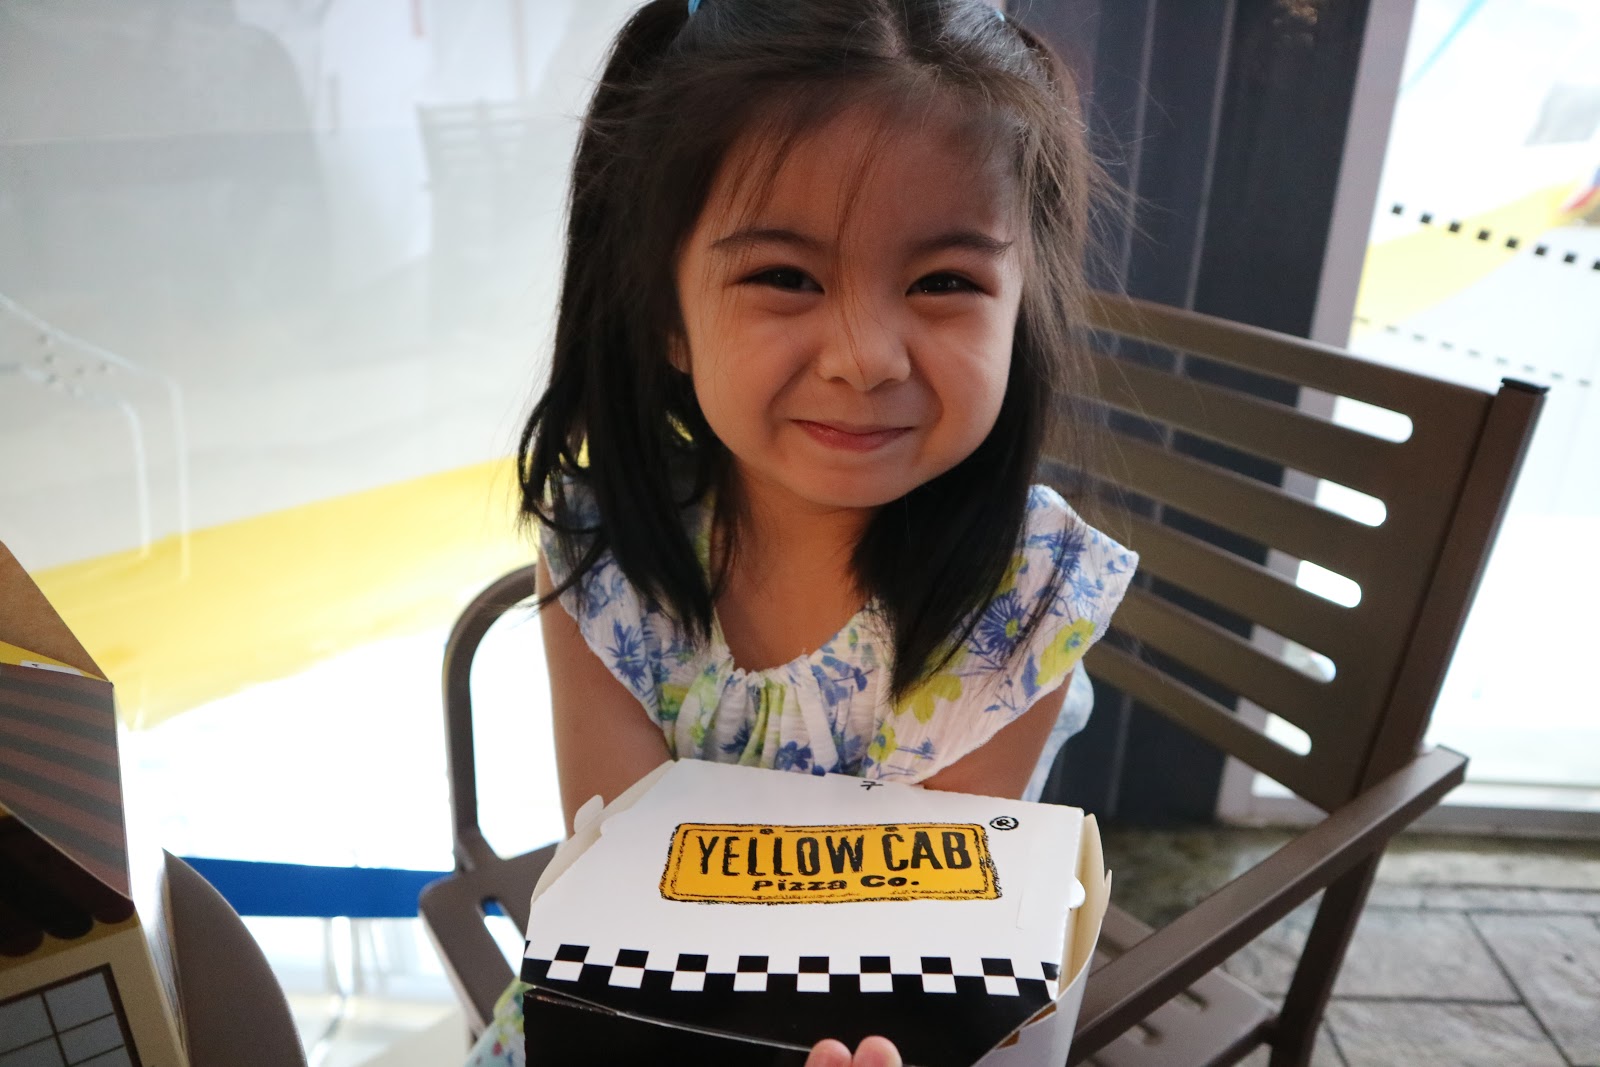 Chloe and her Yellow Cab pizza